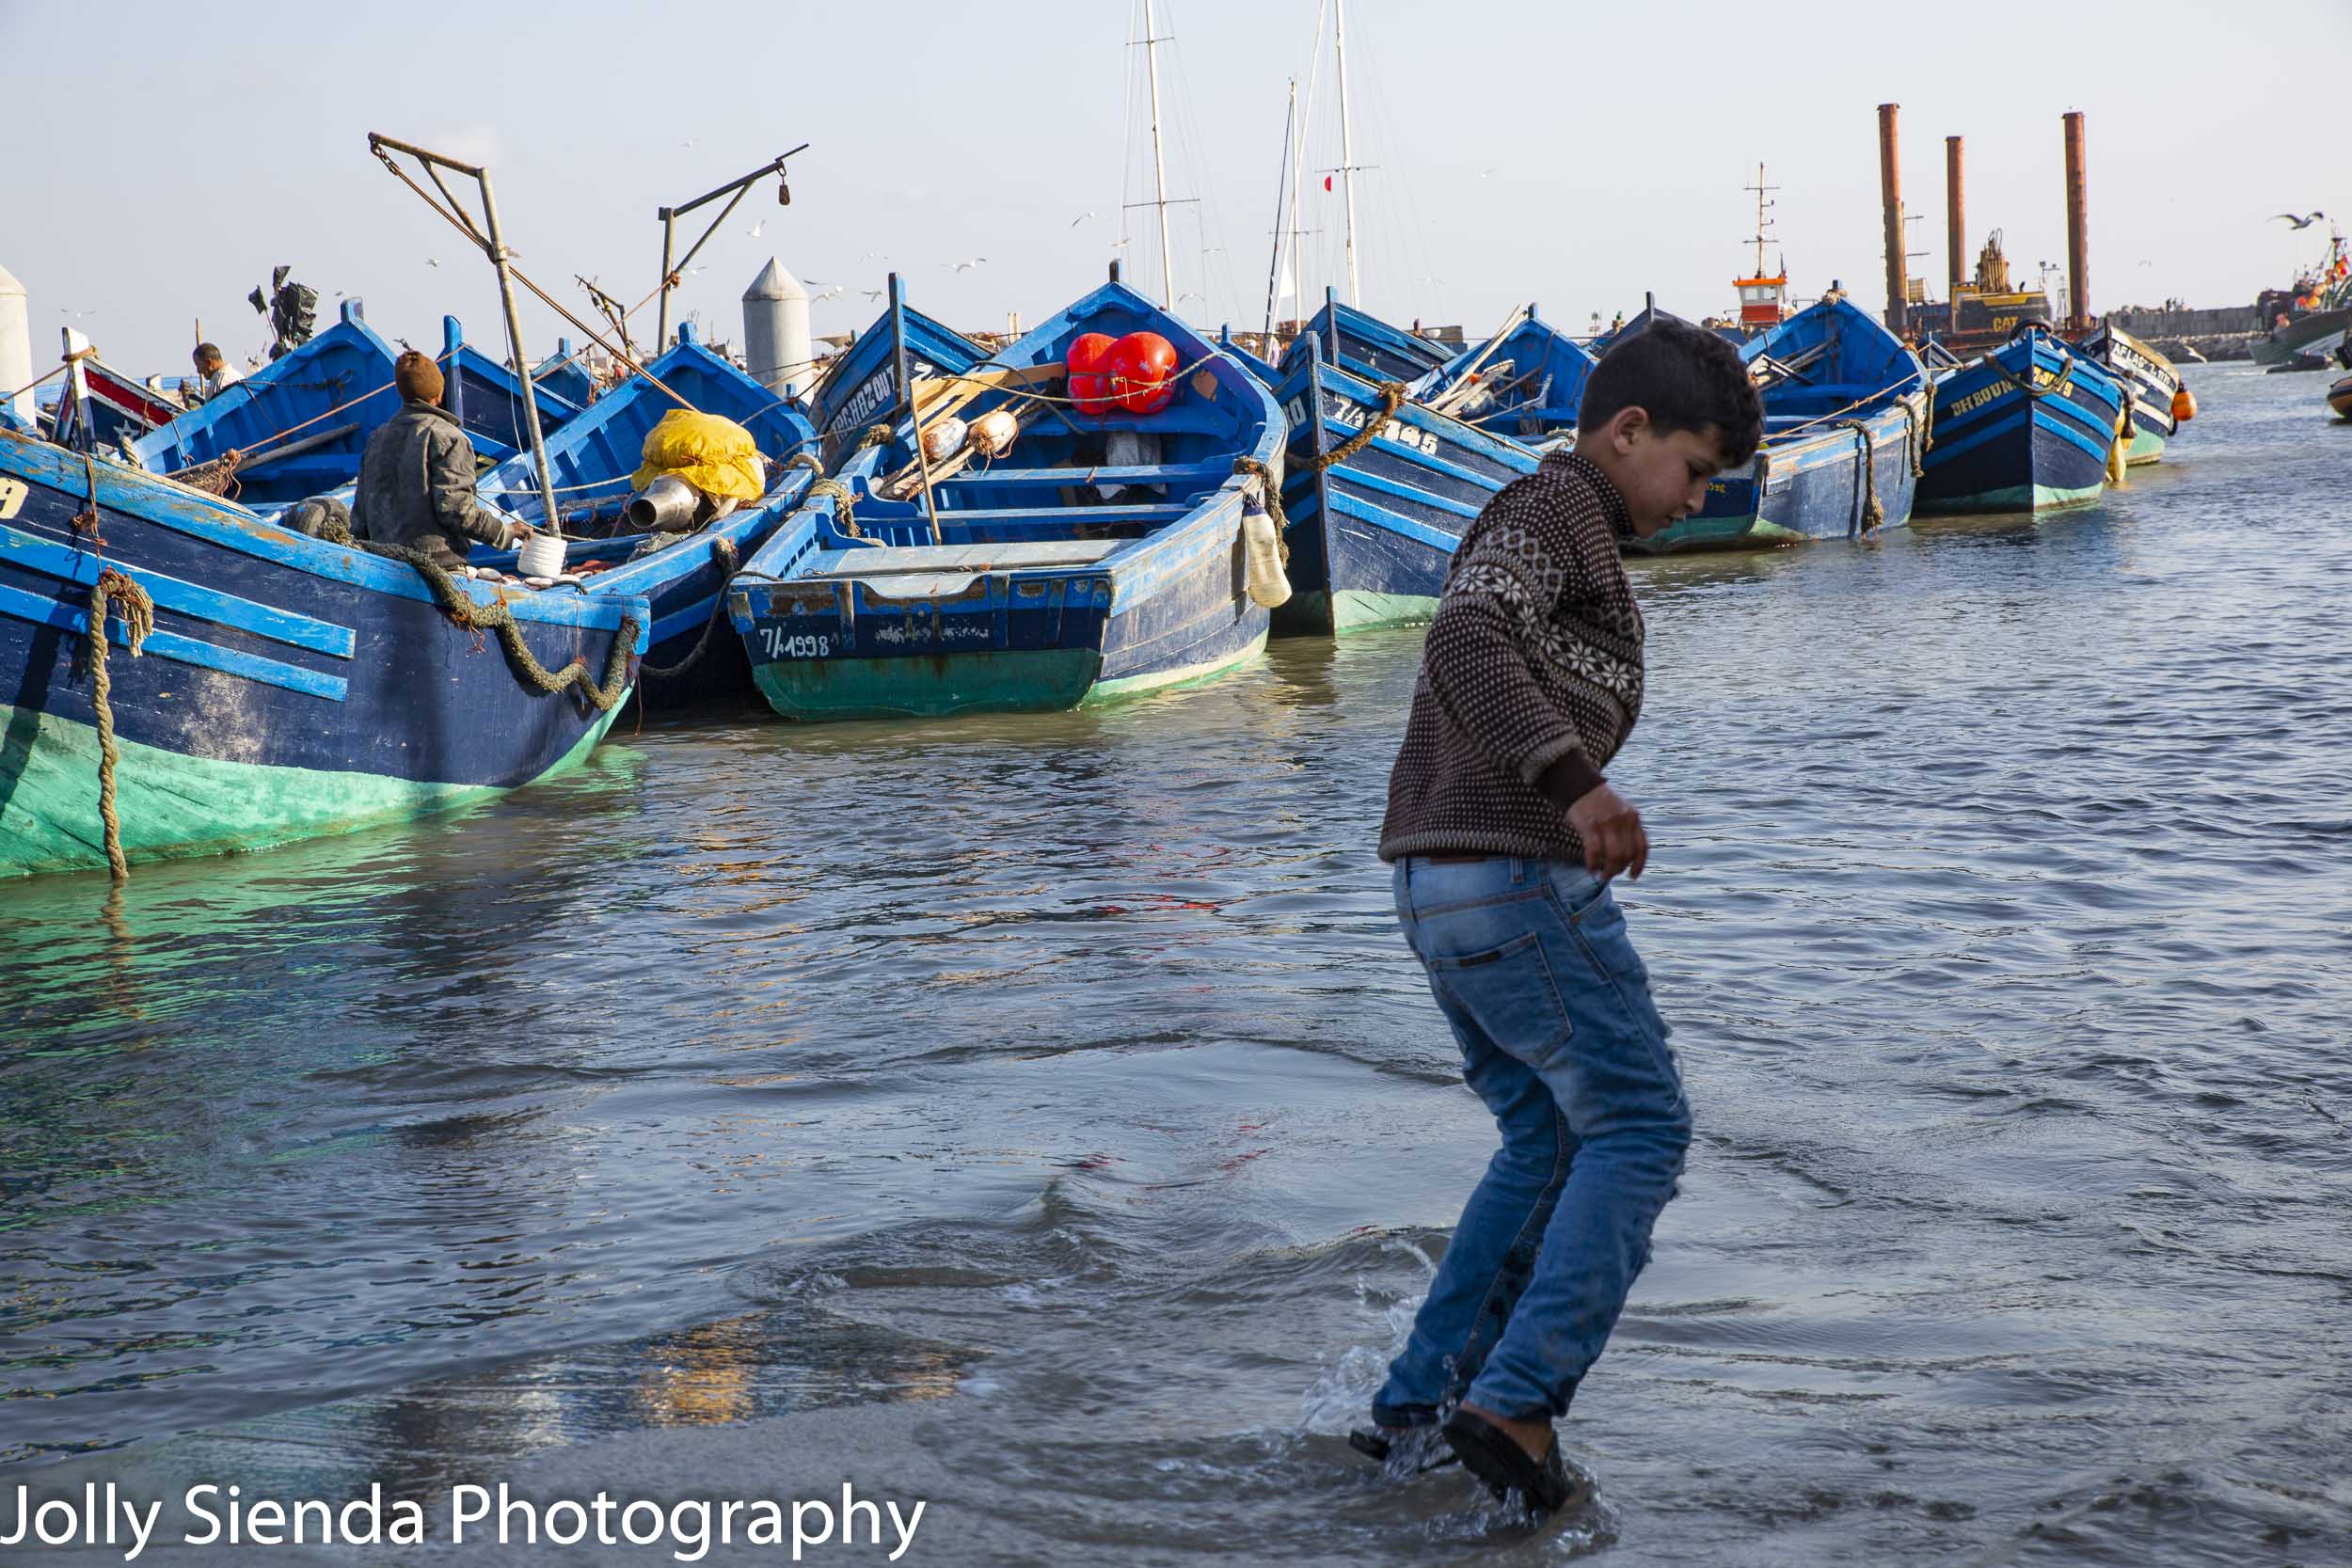 Boy plays in the water with fisherman and boats